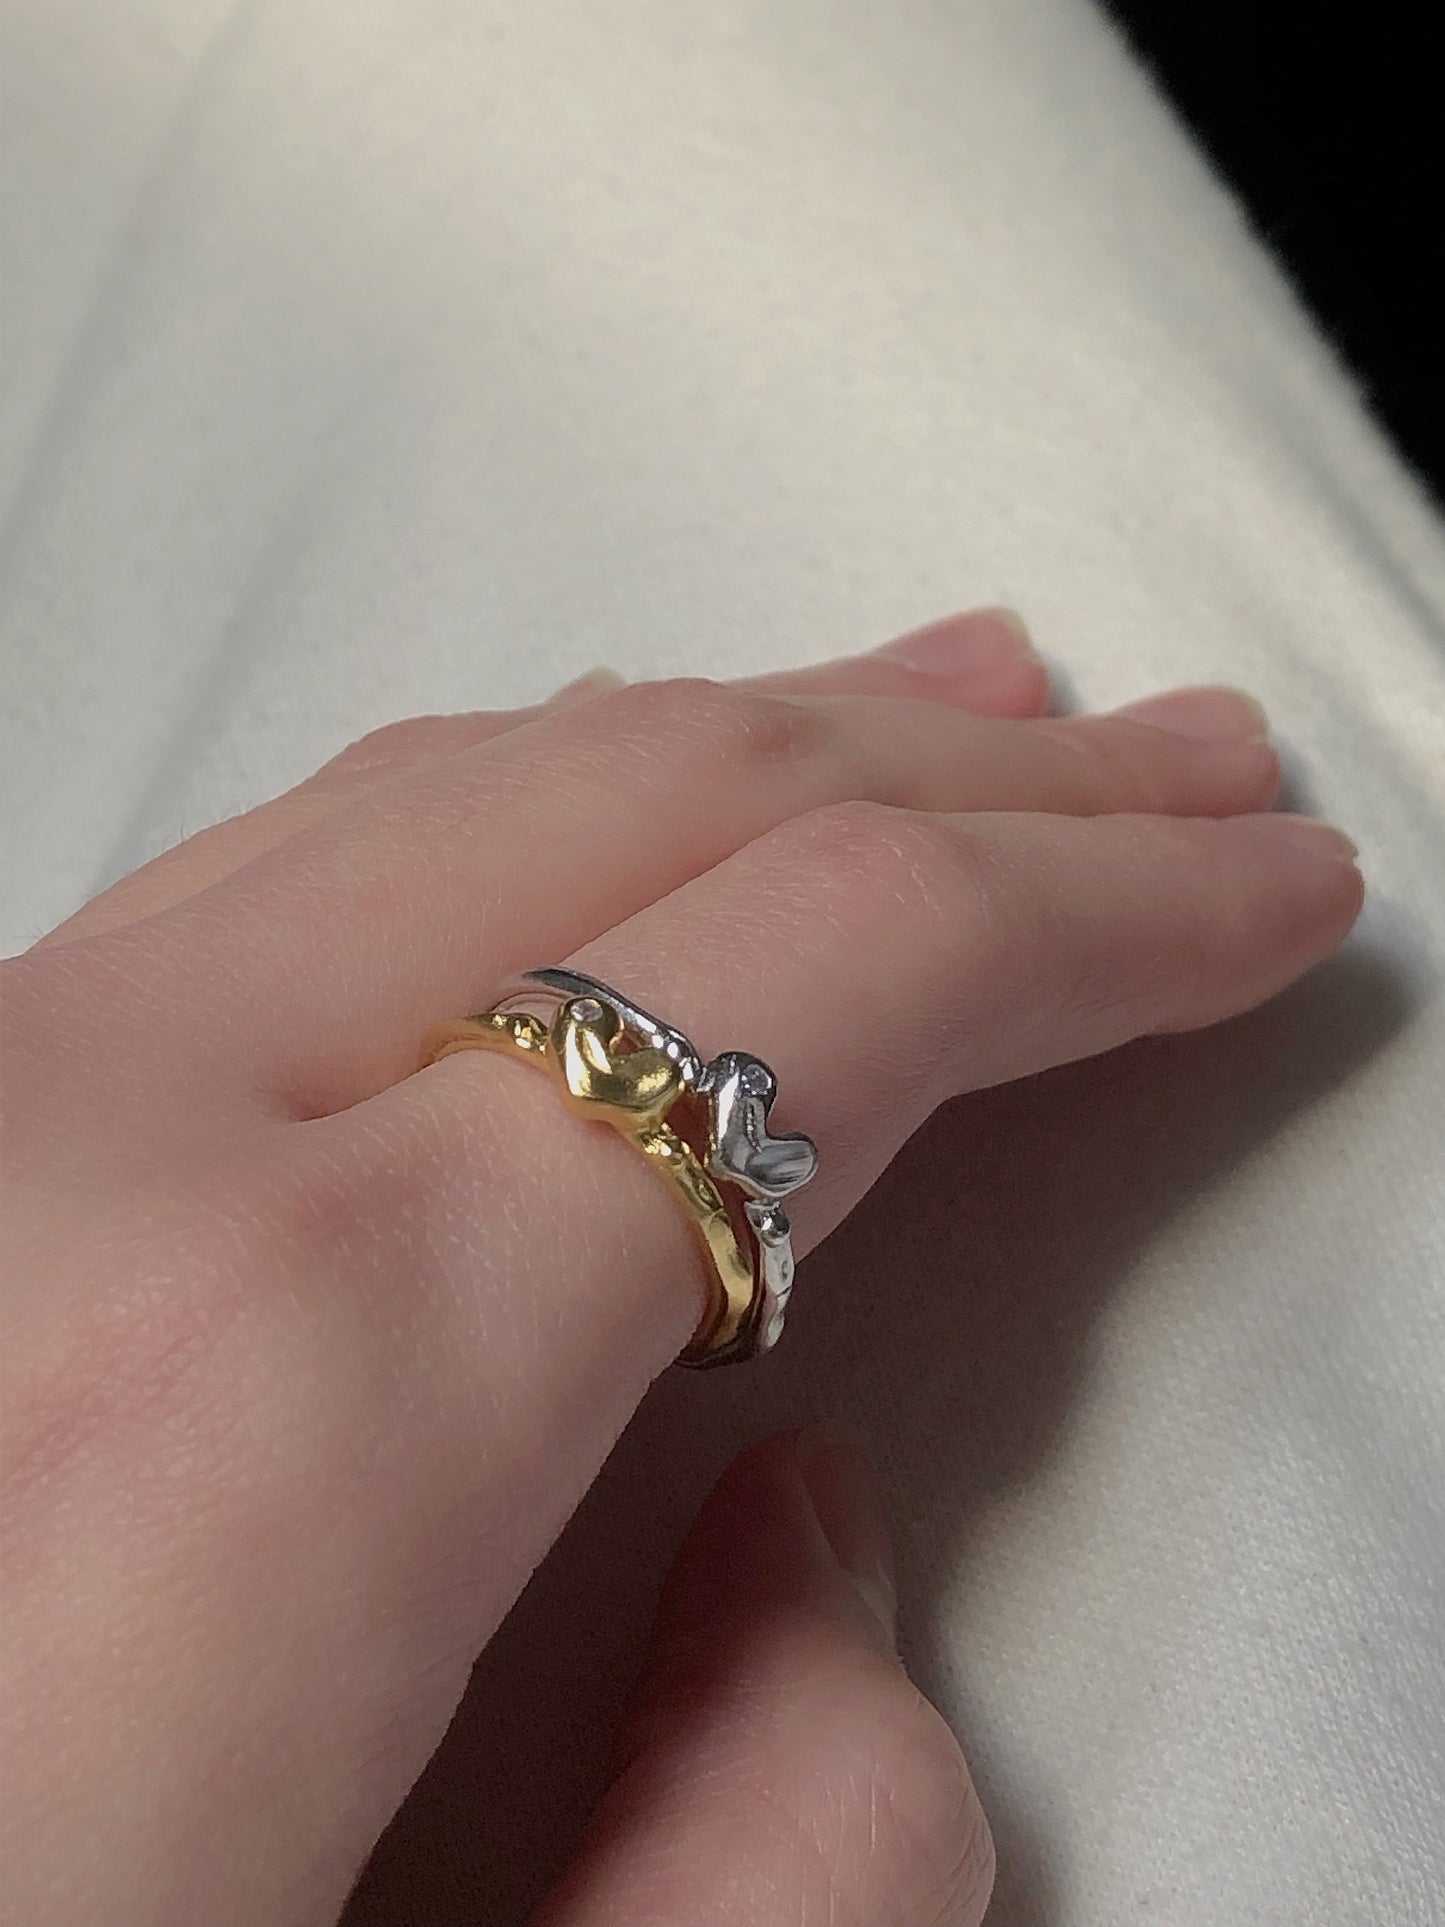 Dainty heart ring in gold and silver.